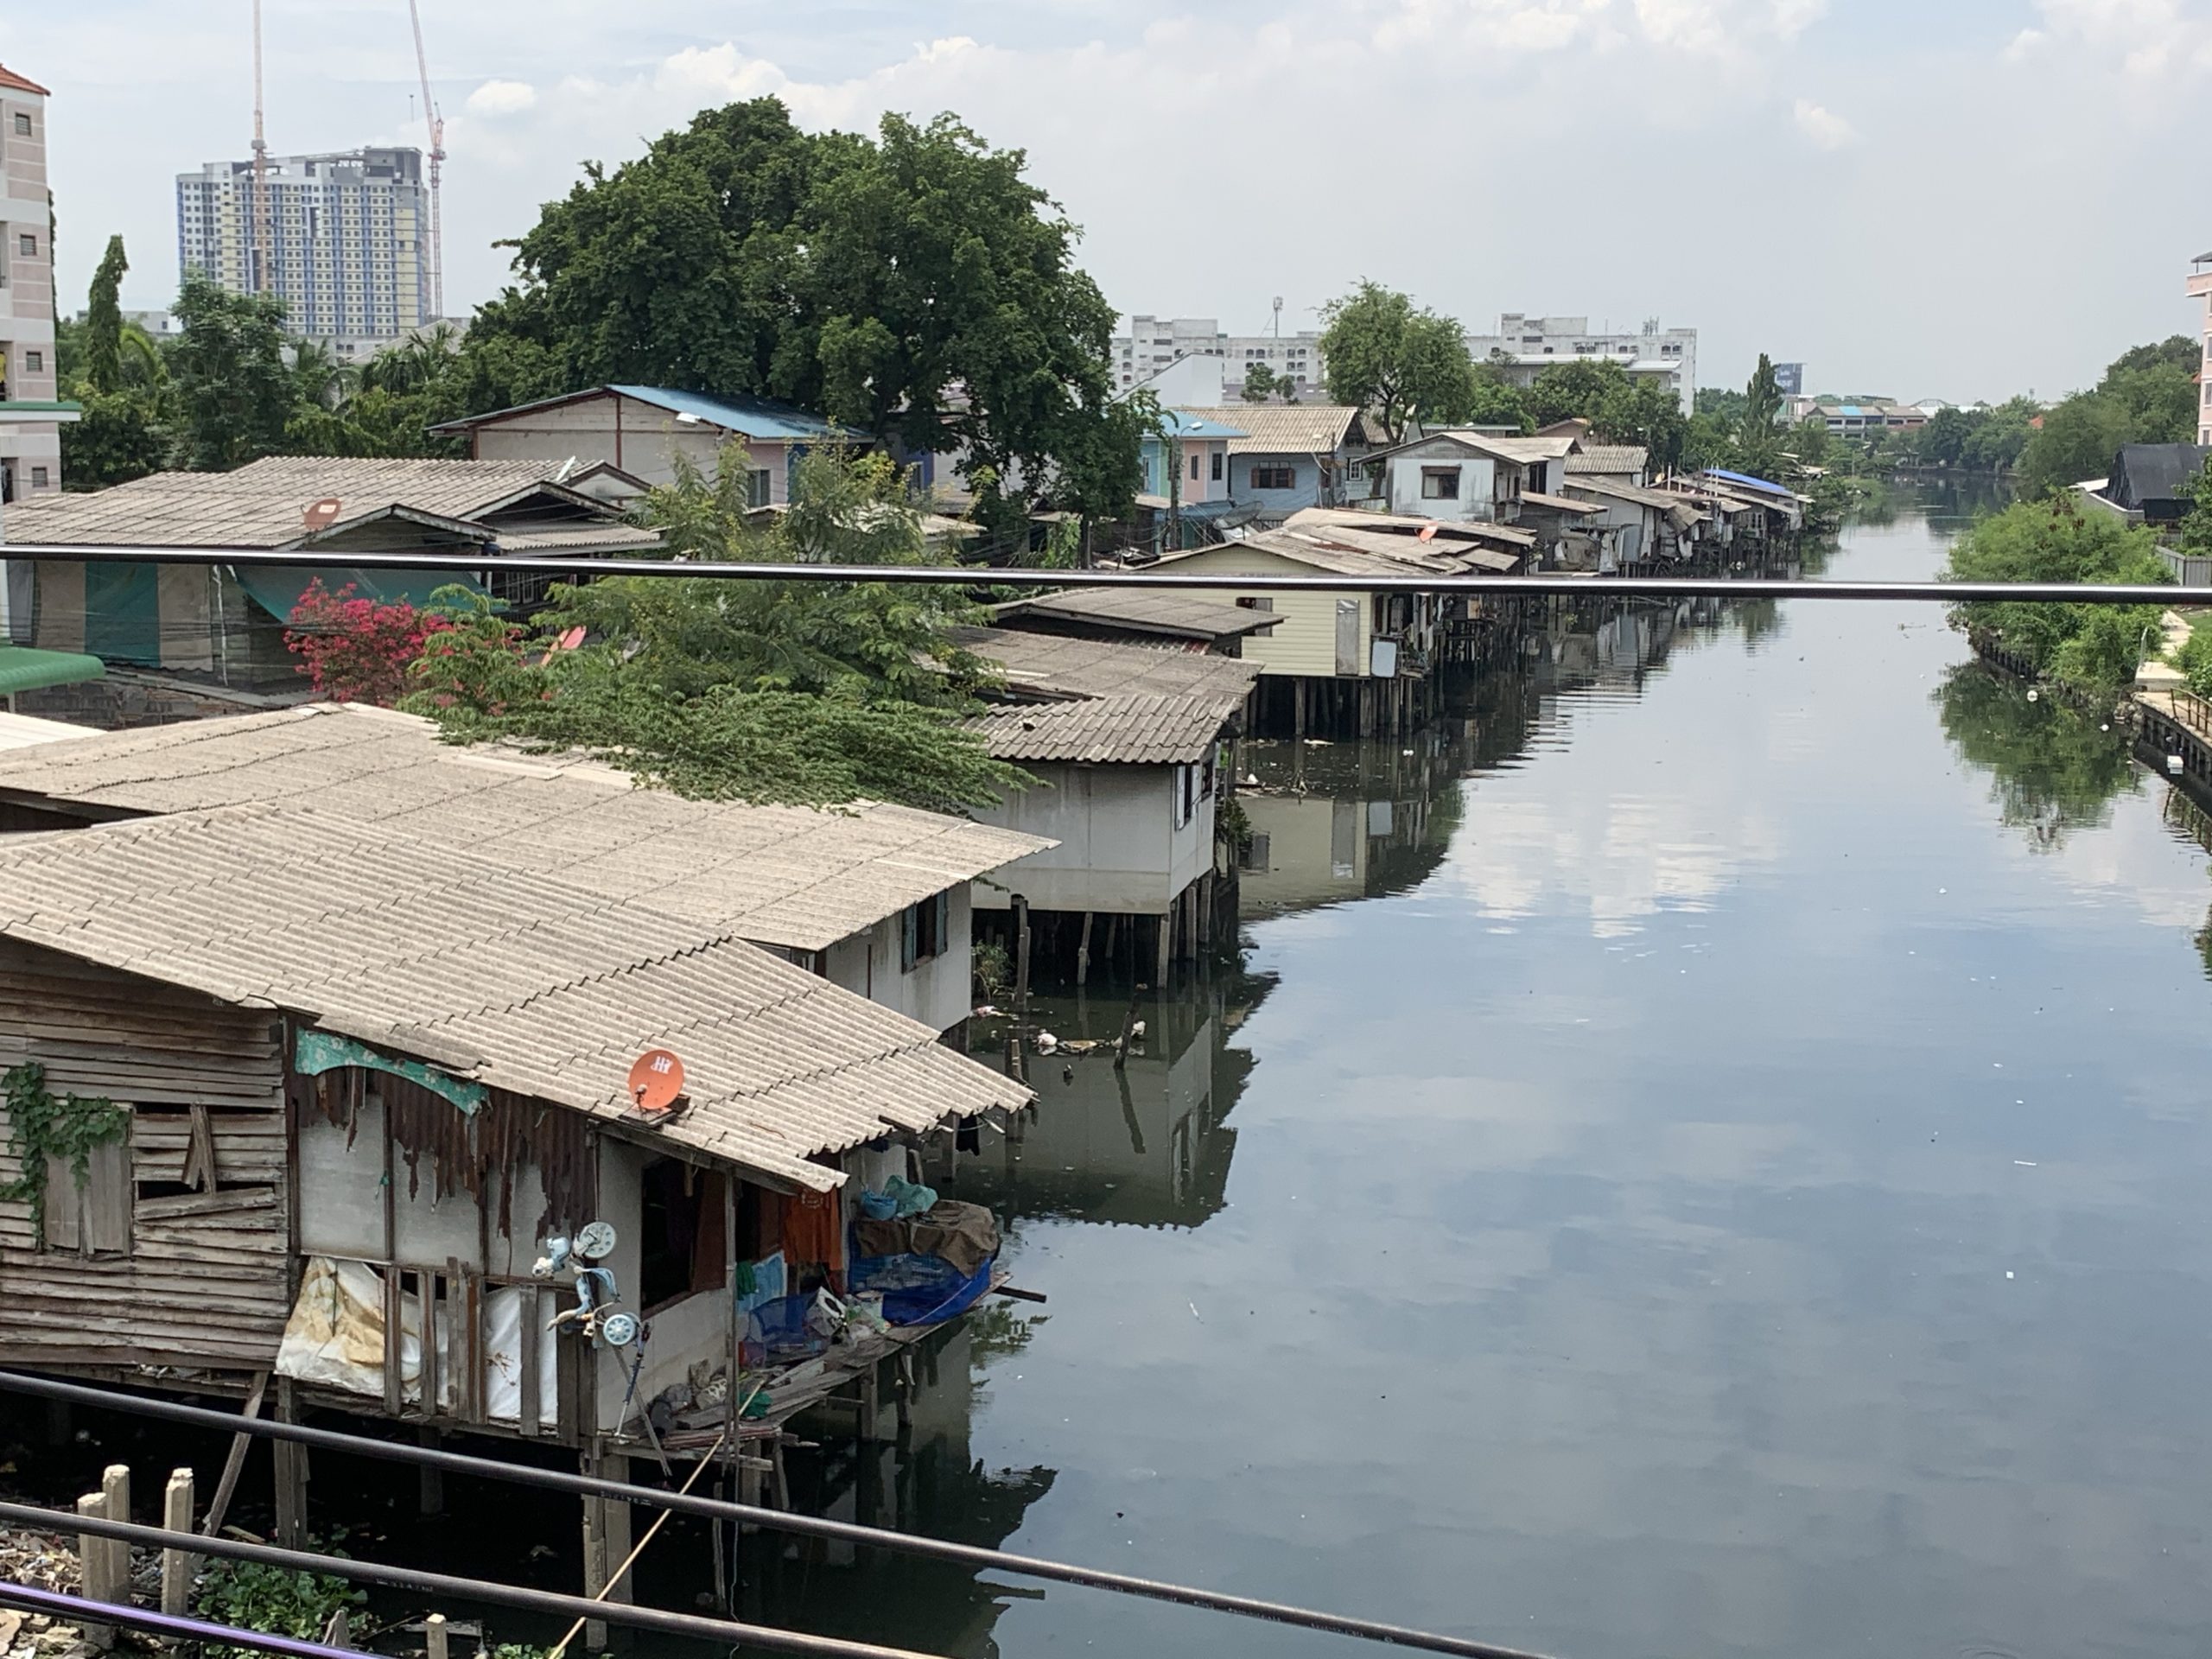 a group of houses on stilts on water